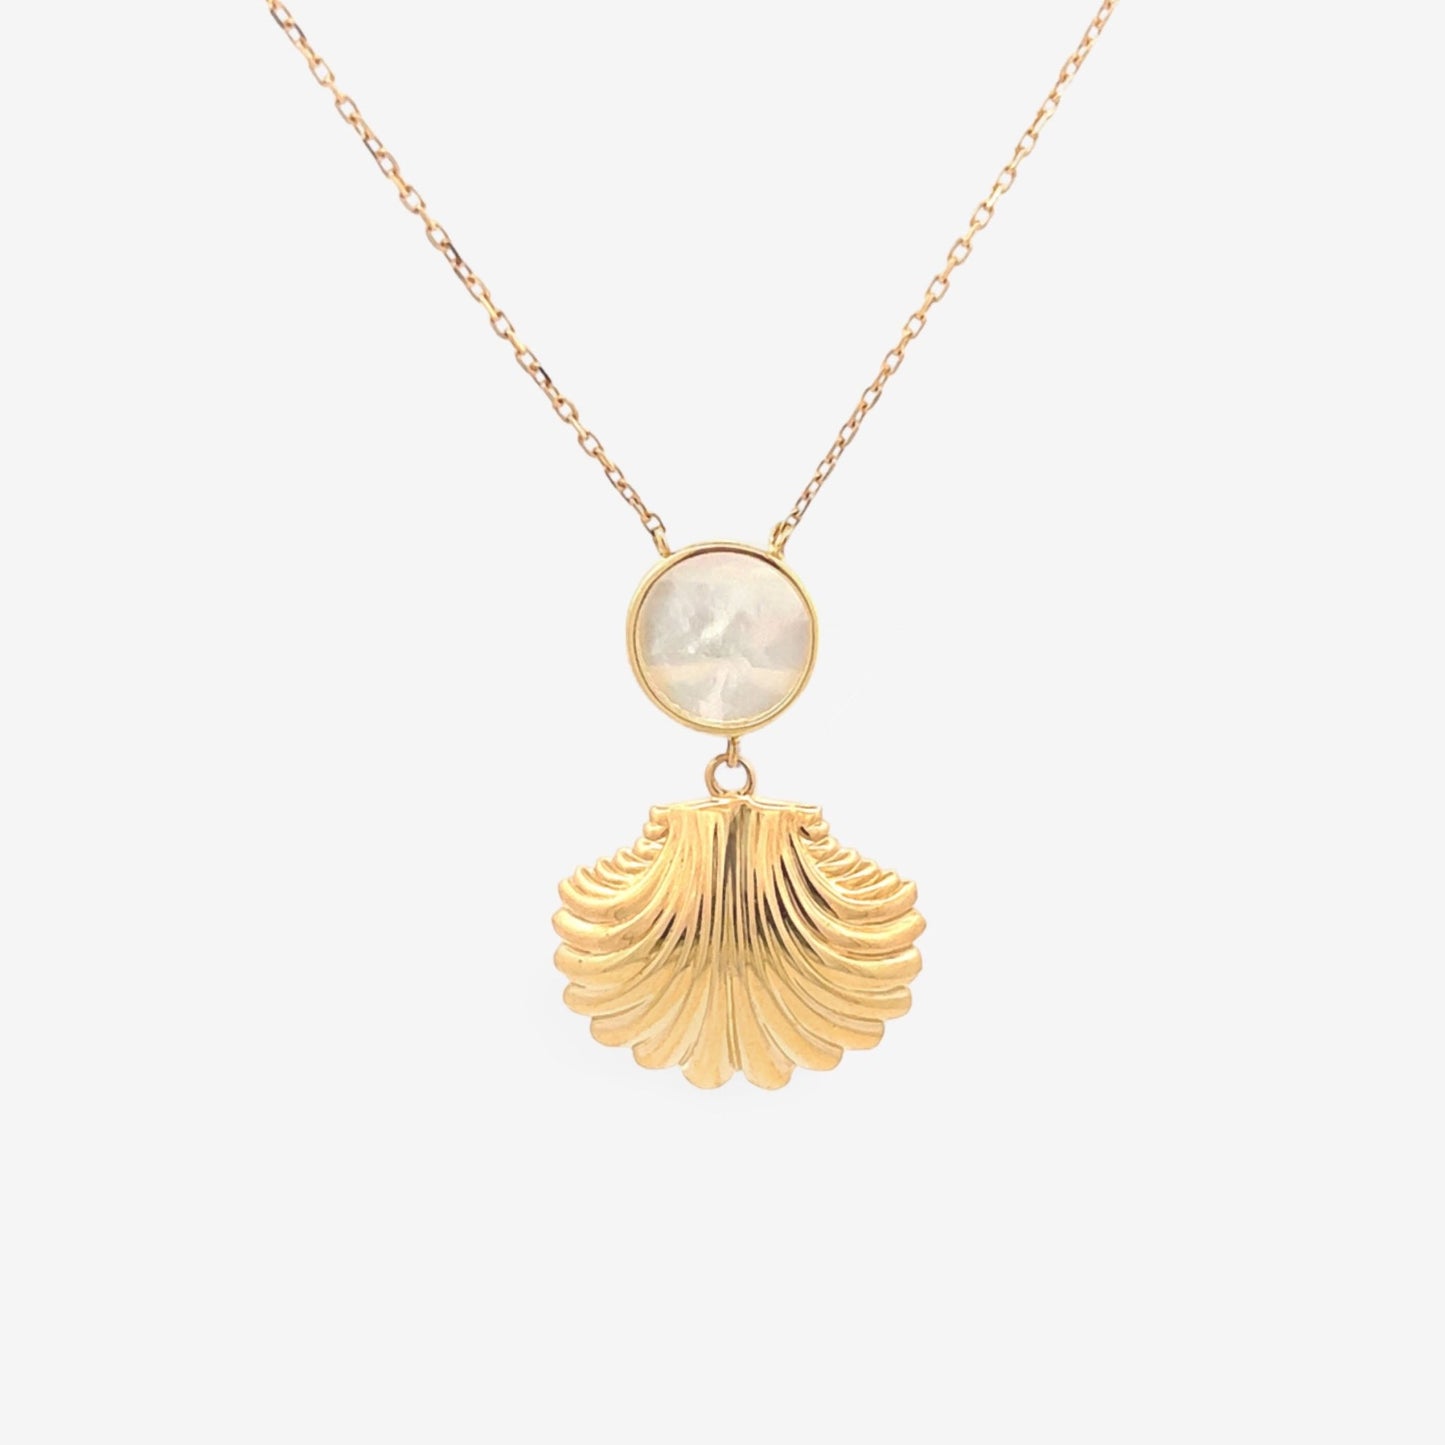 Freya Necklace in Mother of Pearl - 18k Gold - Lynor